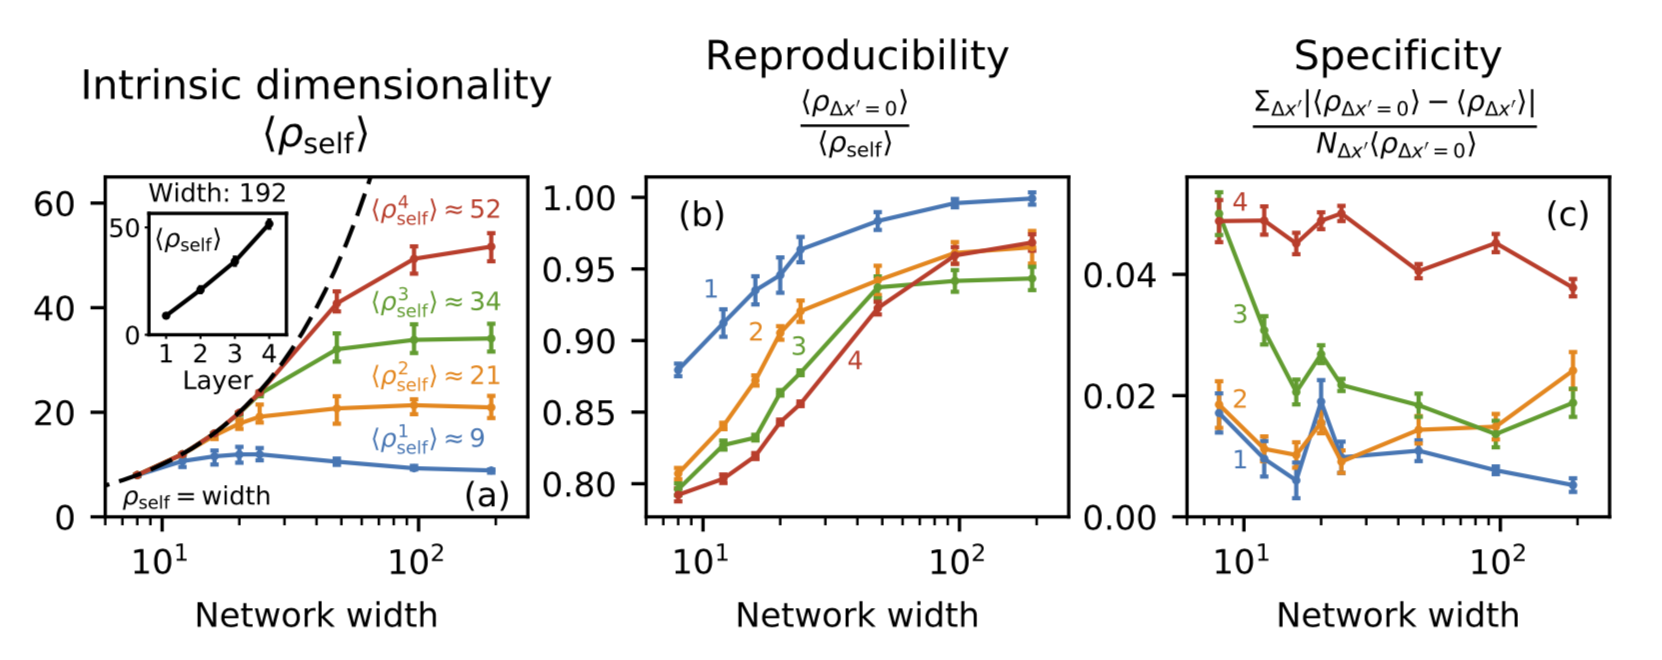 The intrinsic dimensionality, reproducibility, and specificity of the four layers at varying width. The lines indicate mean values. The error bars on intrinsic dimensionality indicate maxima and minima, whereas the error bars on reproducibility and specificity indicate estimated uncertainty on the means (discussed in the supplemental material). Numbers indicate layer numbers. The inset in (a) shows the limiting dimensionalities of the four layers at width 192.